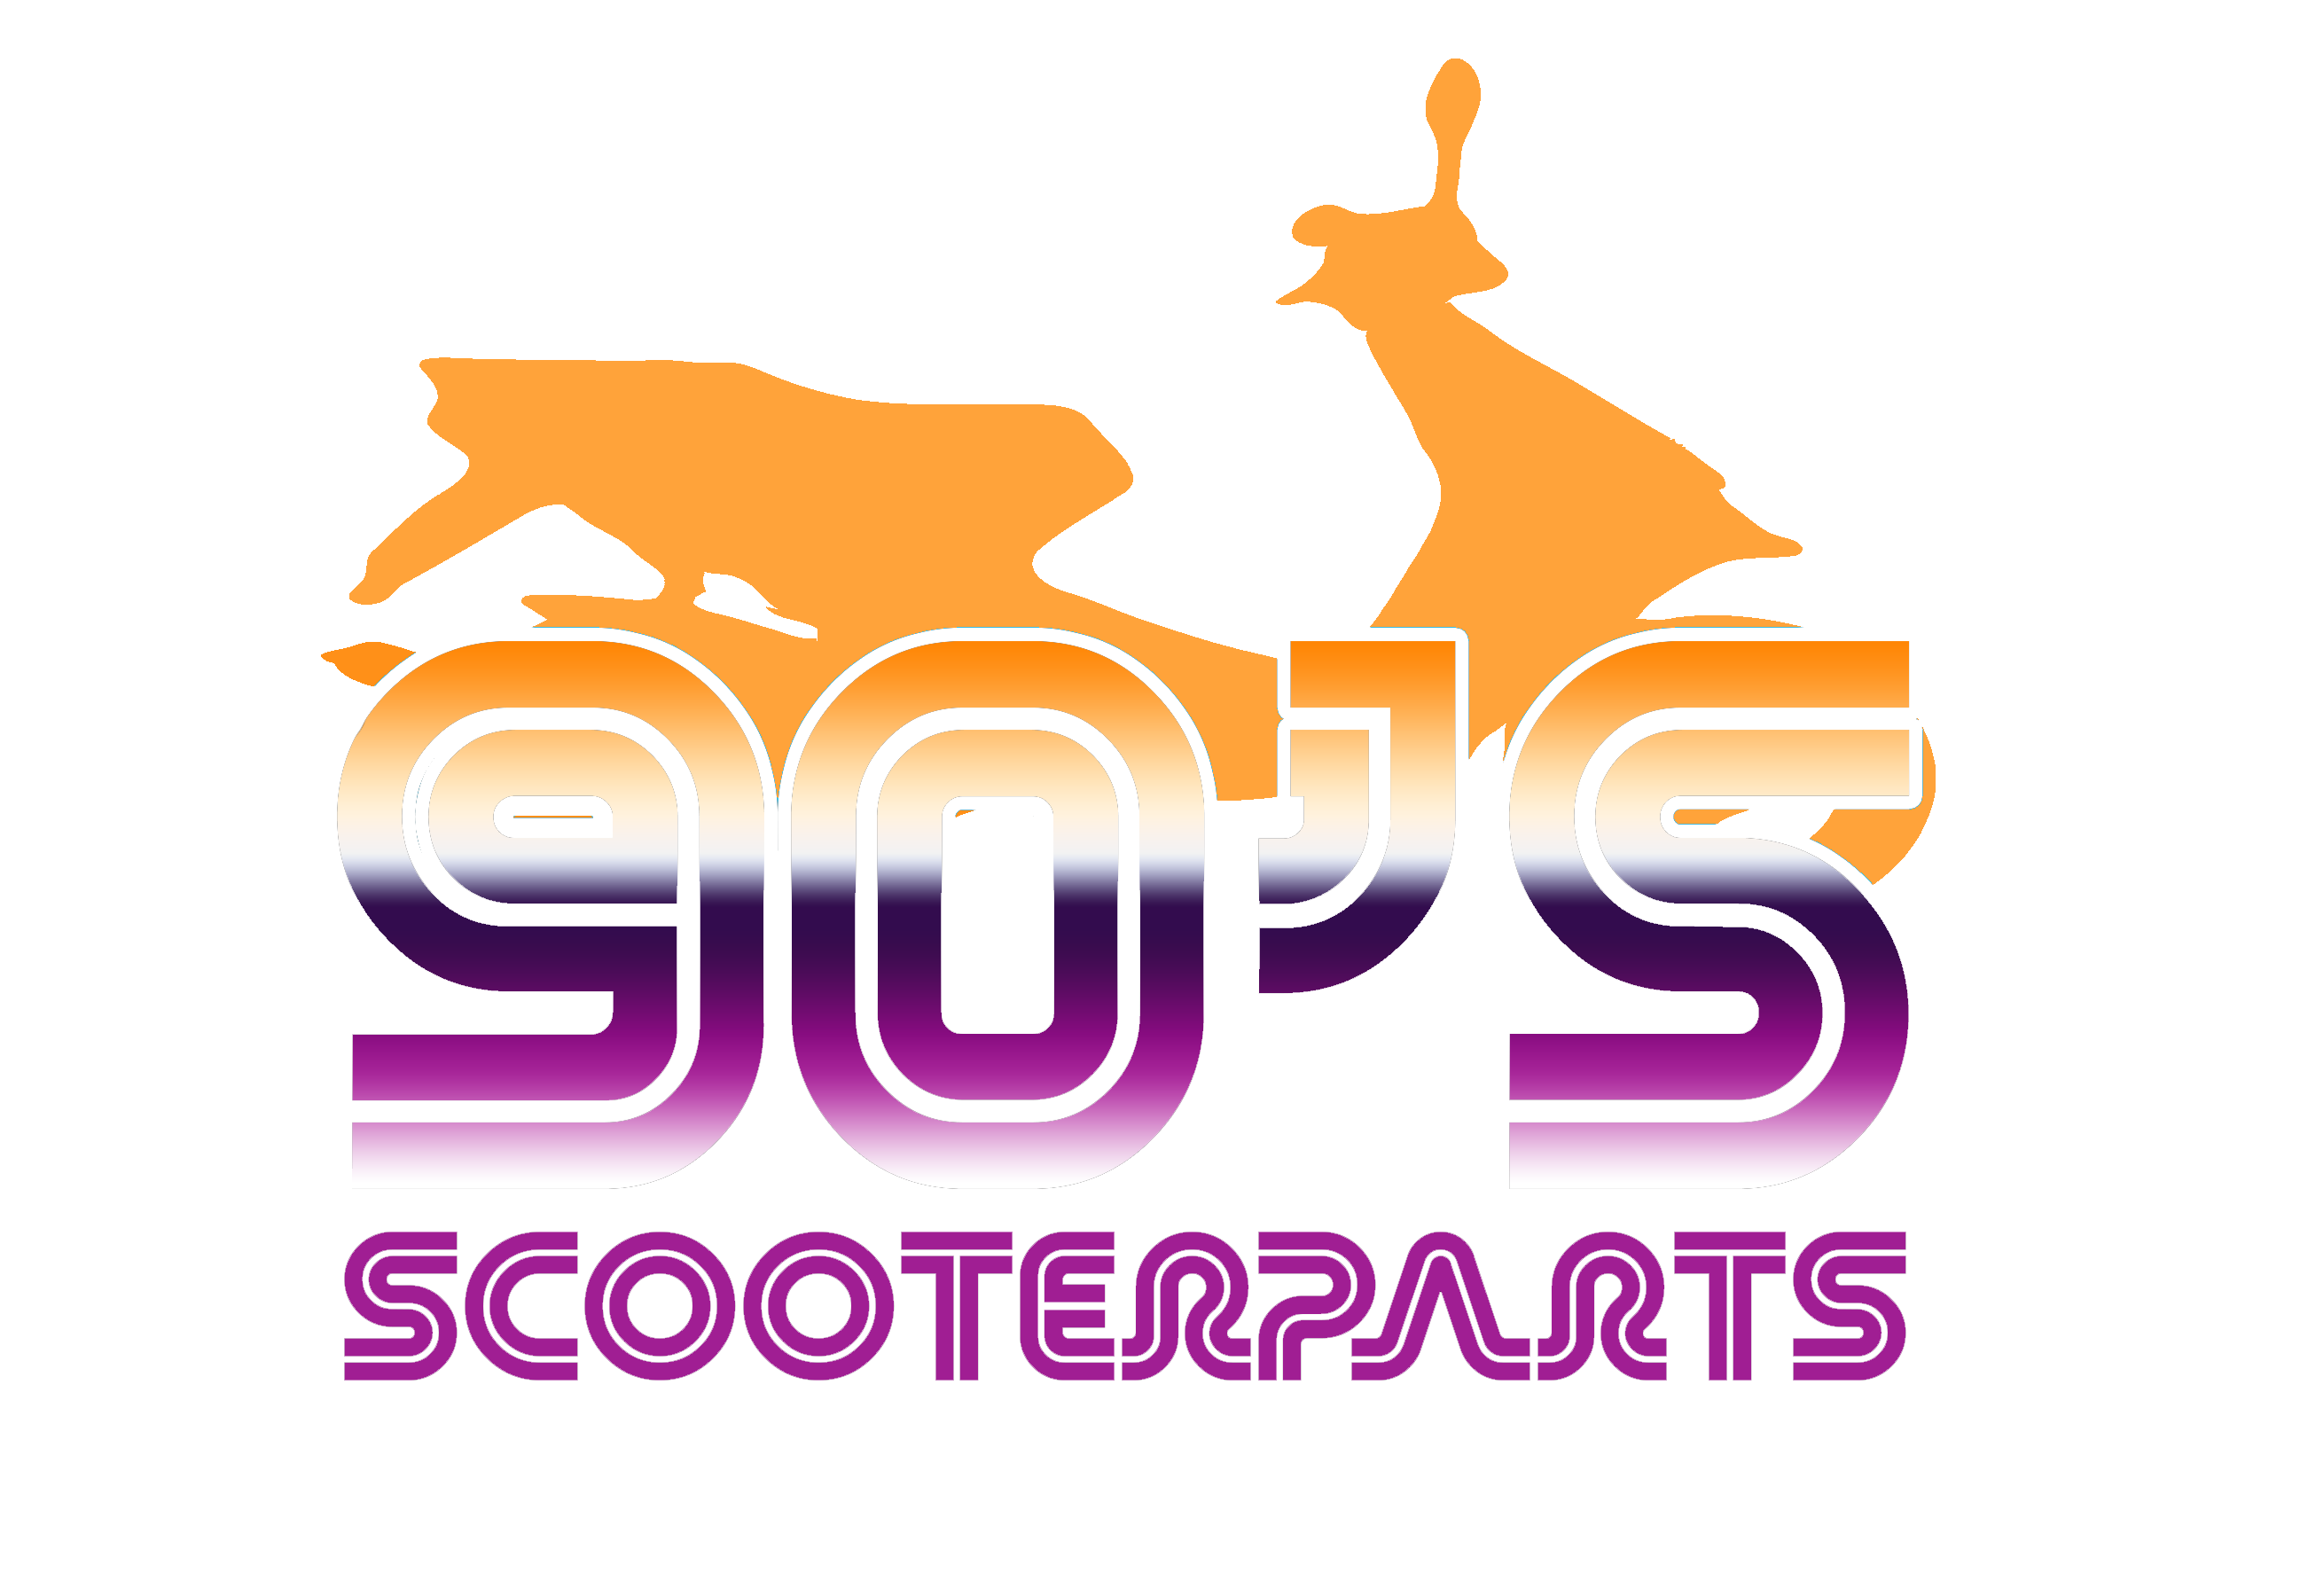 90's Scooter Parts